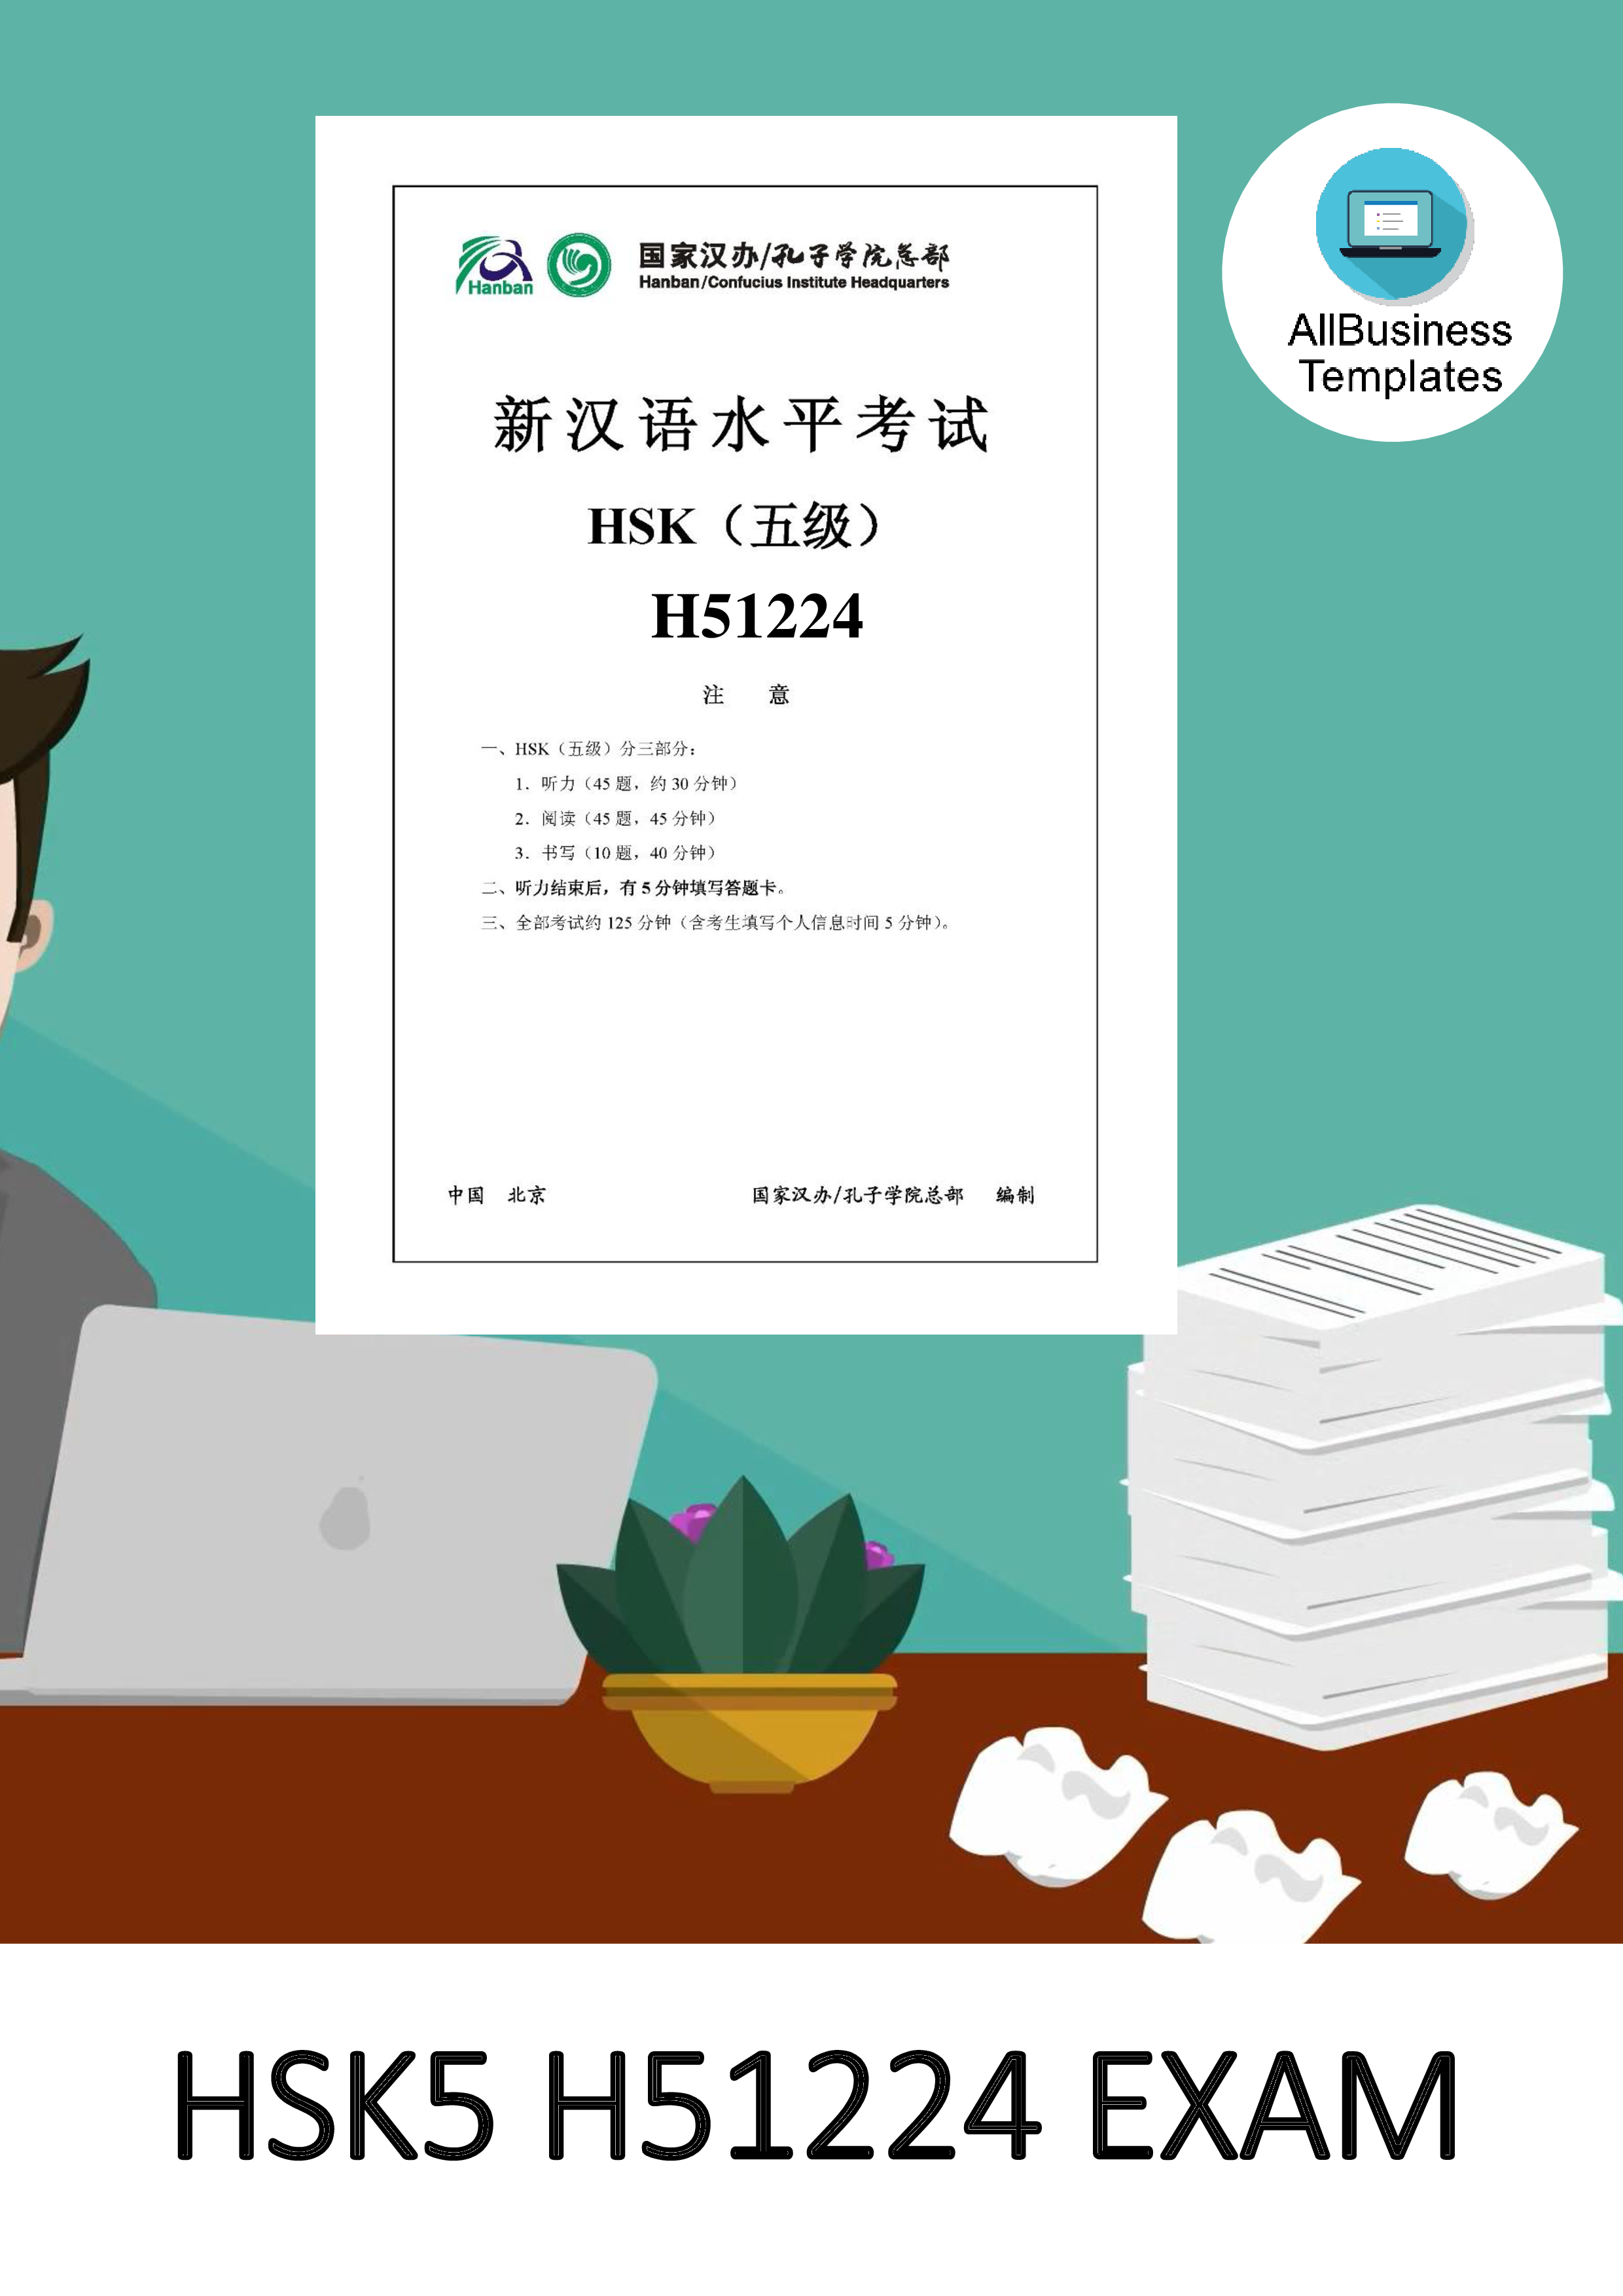 hsk5 h51224 official exam paper template